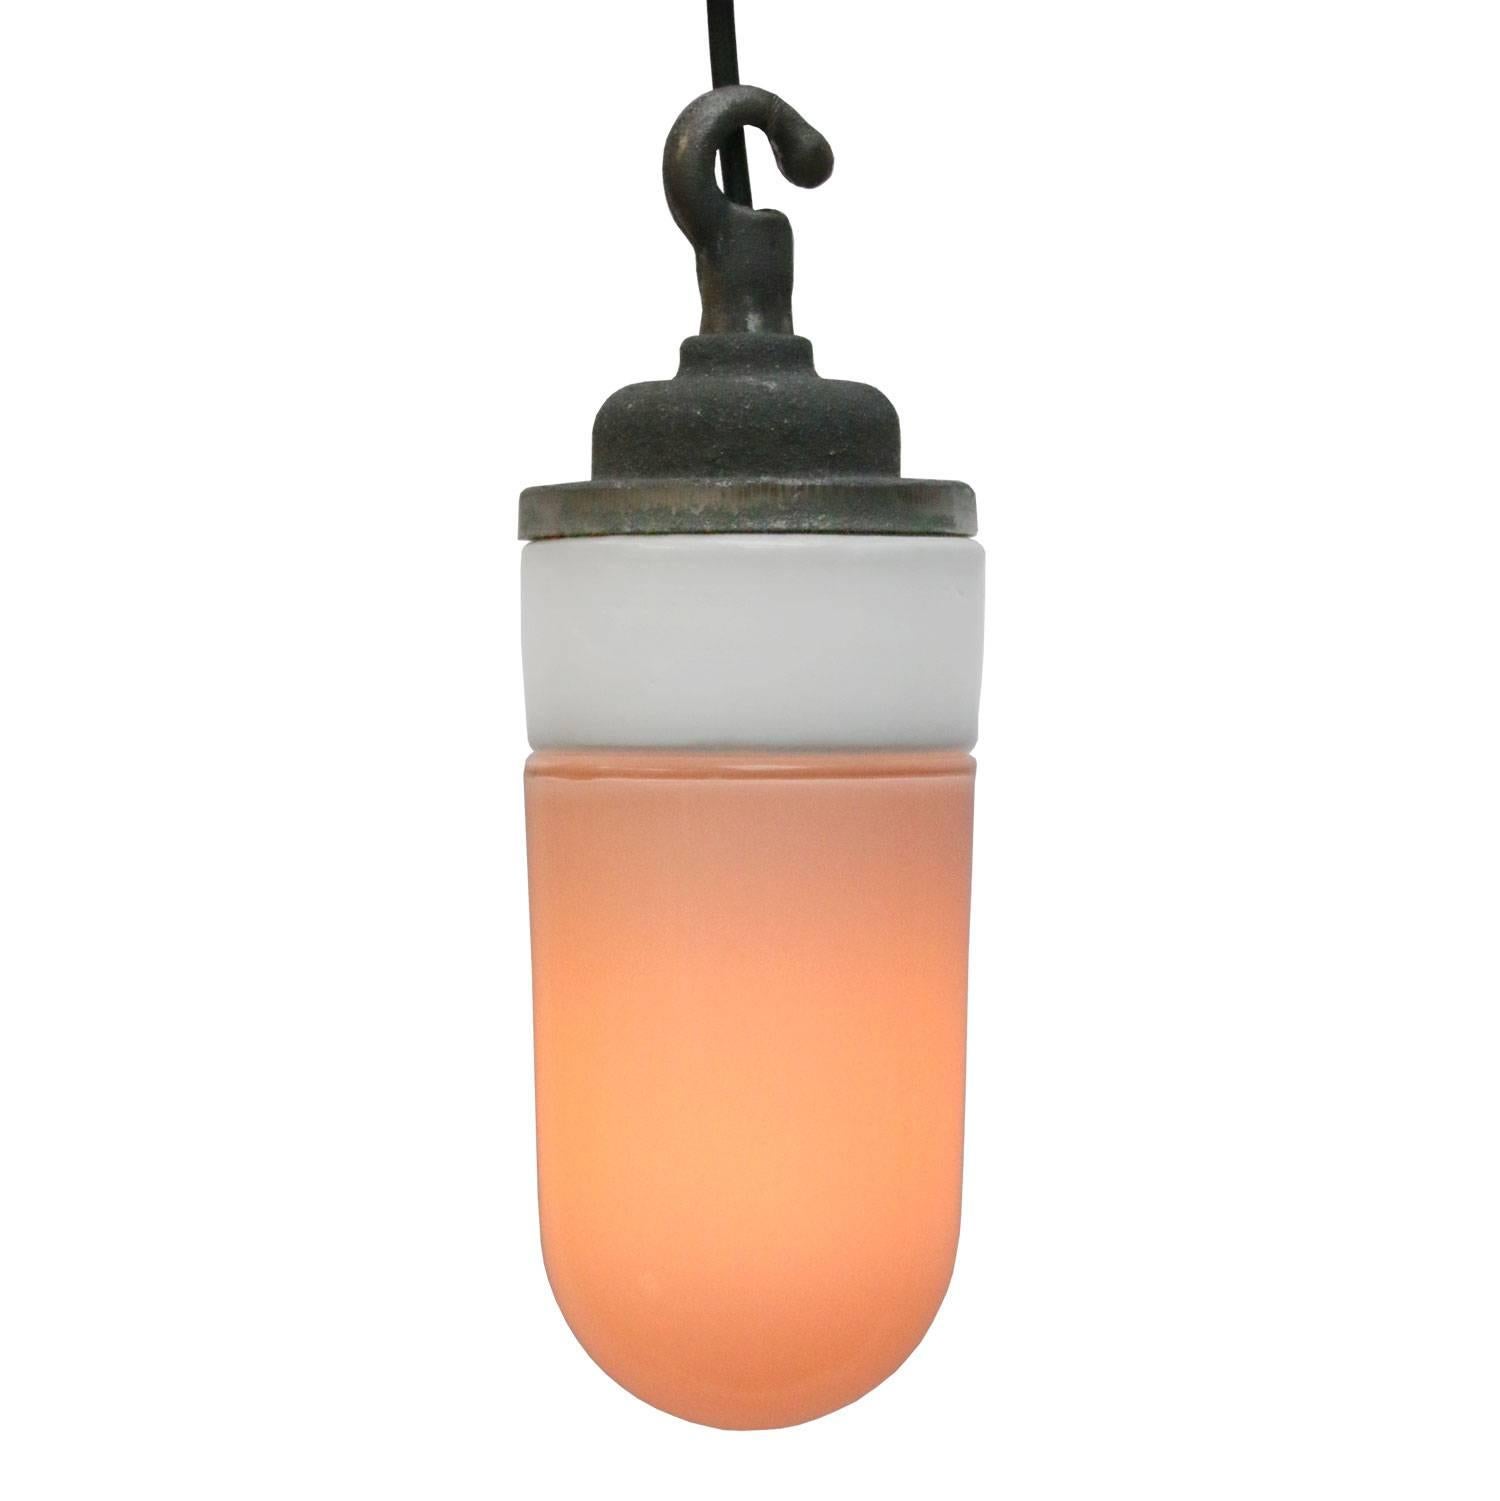 Industrial hanging lamp. White porcelain. Opaline glass.
Two conductors. No ground.

Weight: 1.7 kg / 3.7 lb

All lamps have been made suitable by international standards for incandescent light bulbs, energy-efficient and LED bulbs. E26/E27 bulb